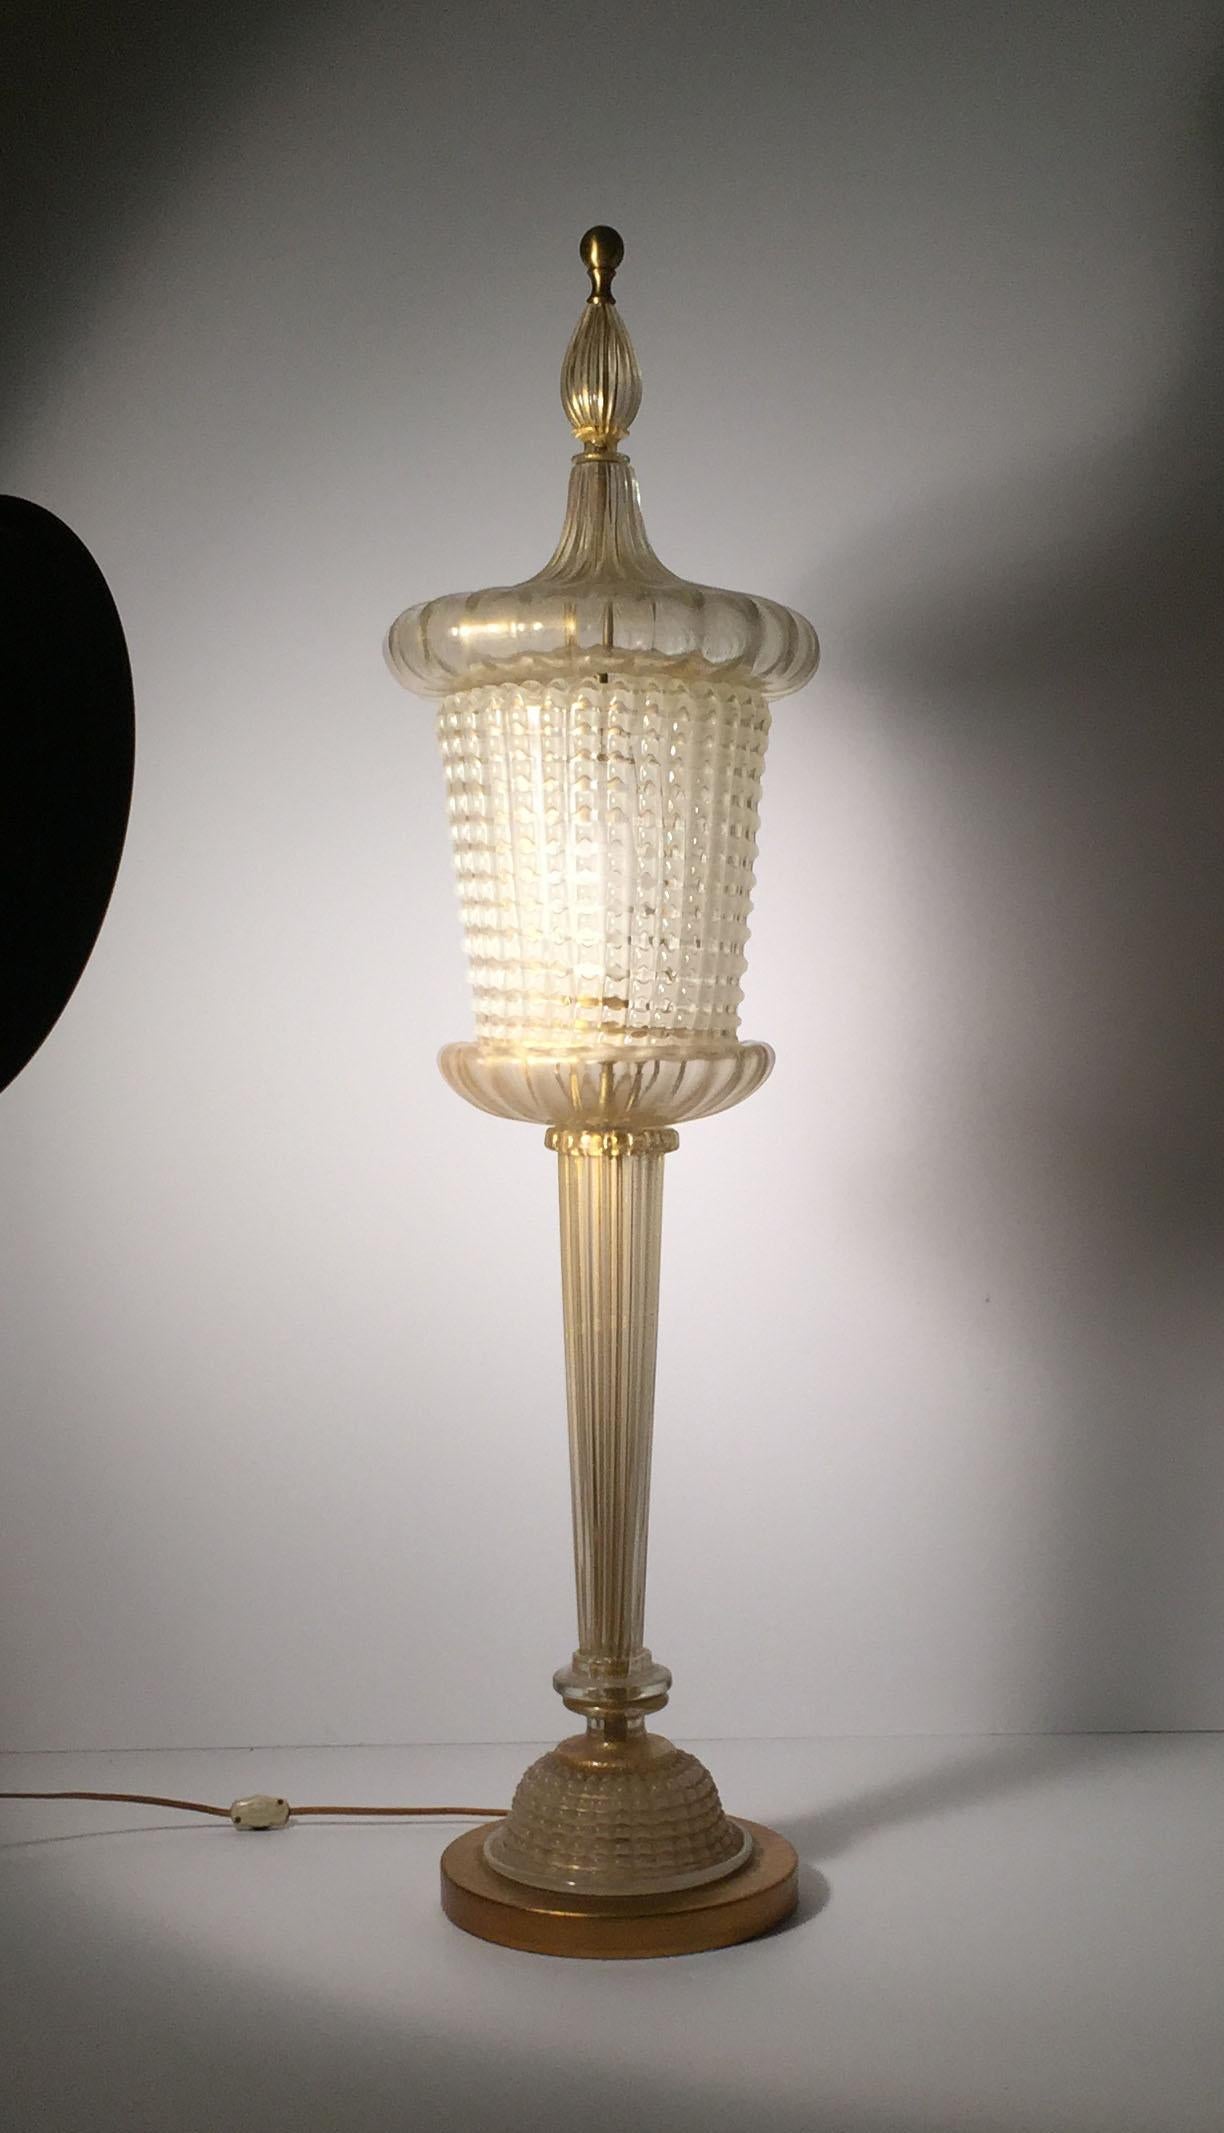 Barovier glass Table lamp in the form of a lantern design.

Hollywood Regency, Modern in Design.